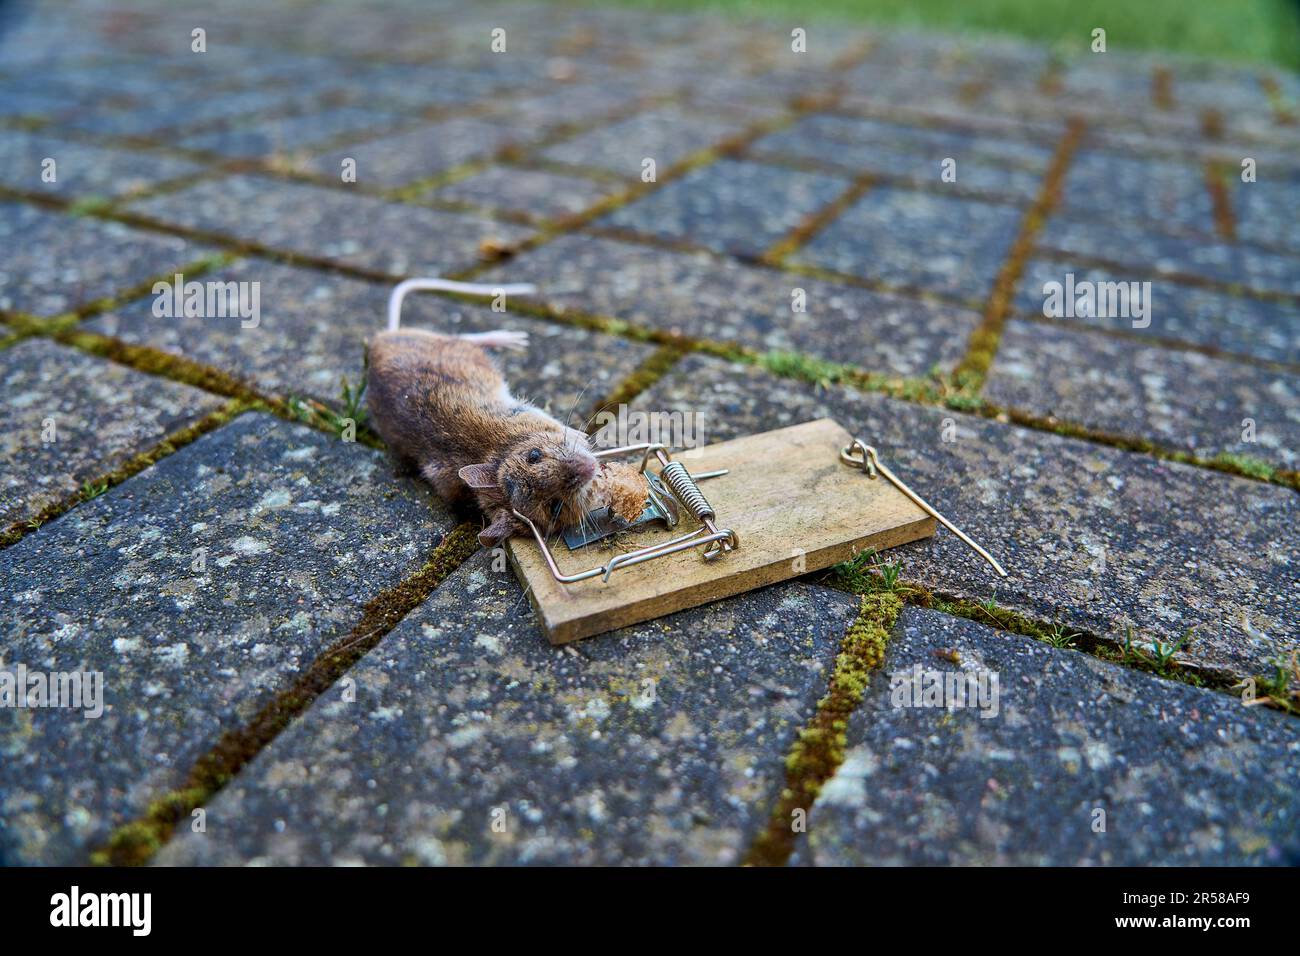 https://c8.alamy.com/comp/2R58AF9/close-up-of-small-bank-vole-mouse-dead-in-an-old-wooden-snap-trap-know-to-often-carry-and-transmit-the-hunta-virus-which-is-a-dangerous-disease-for-2R58AF9.jpg